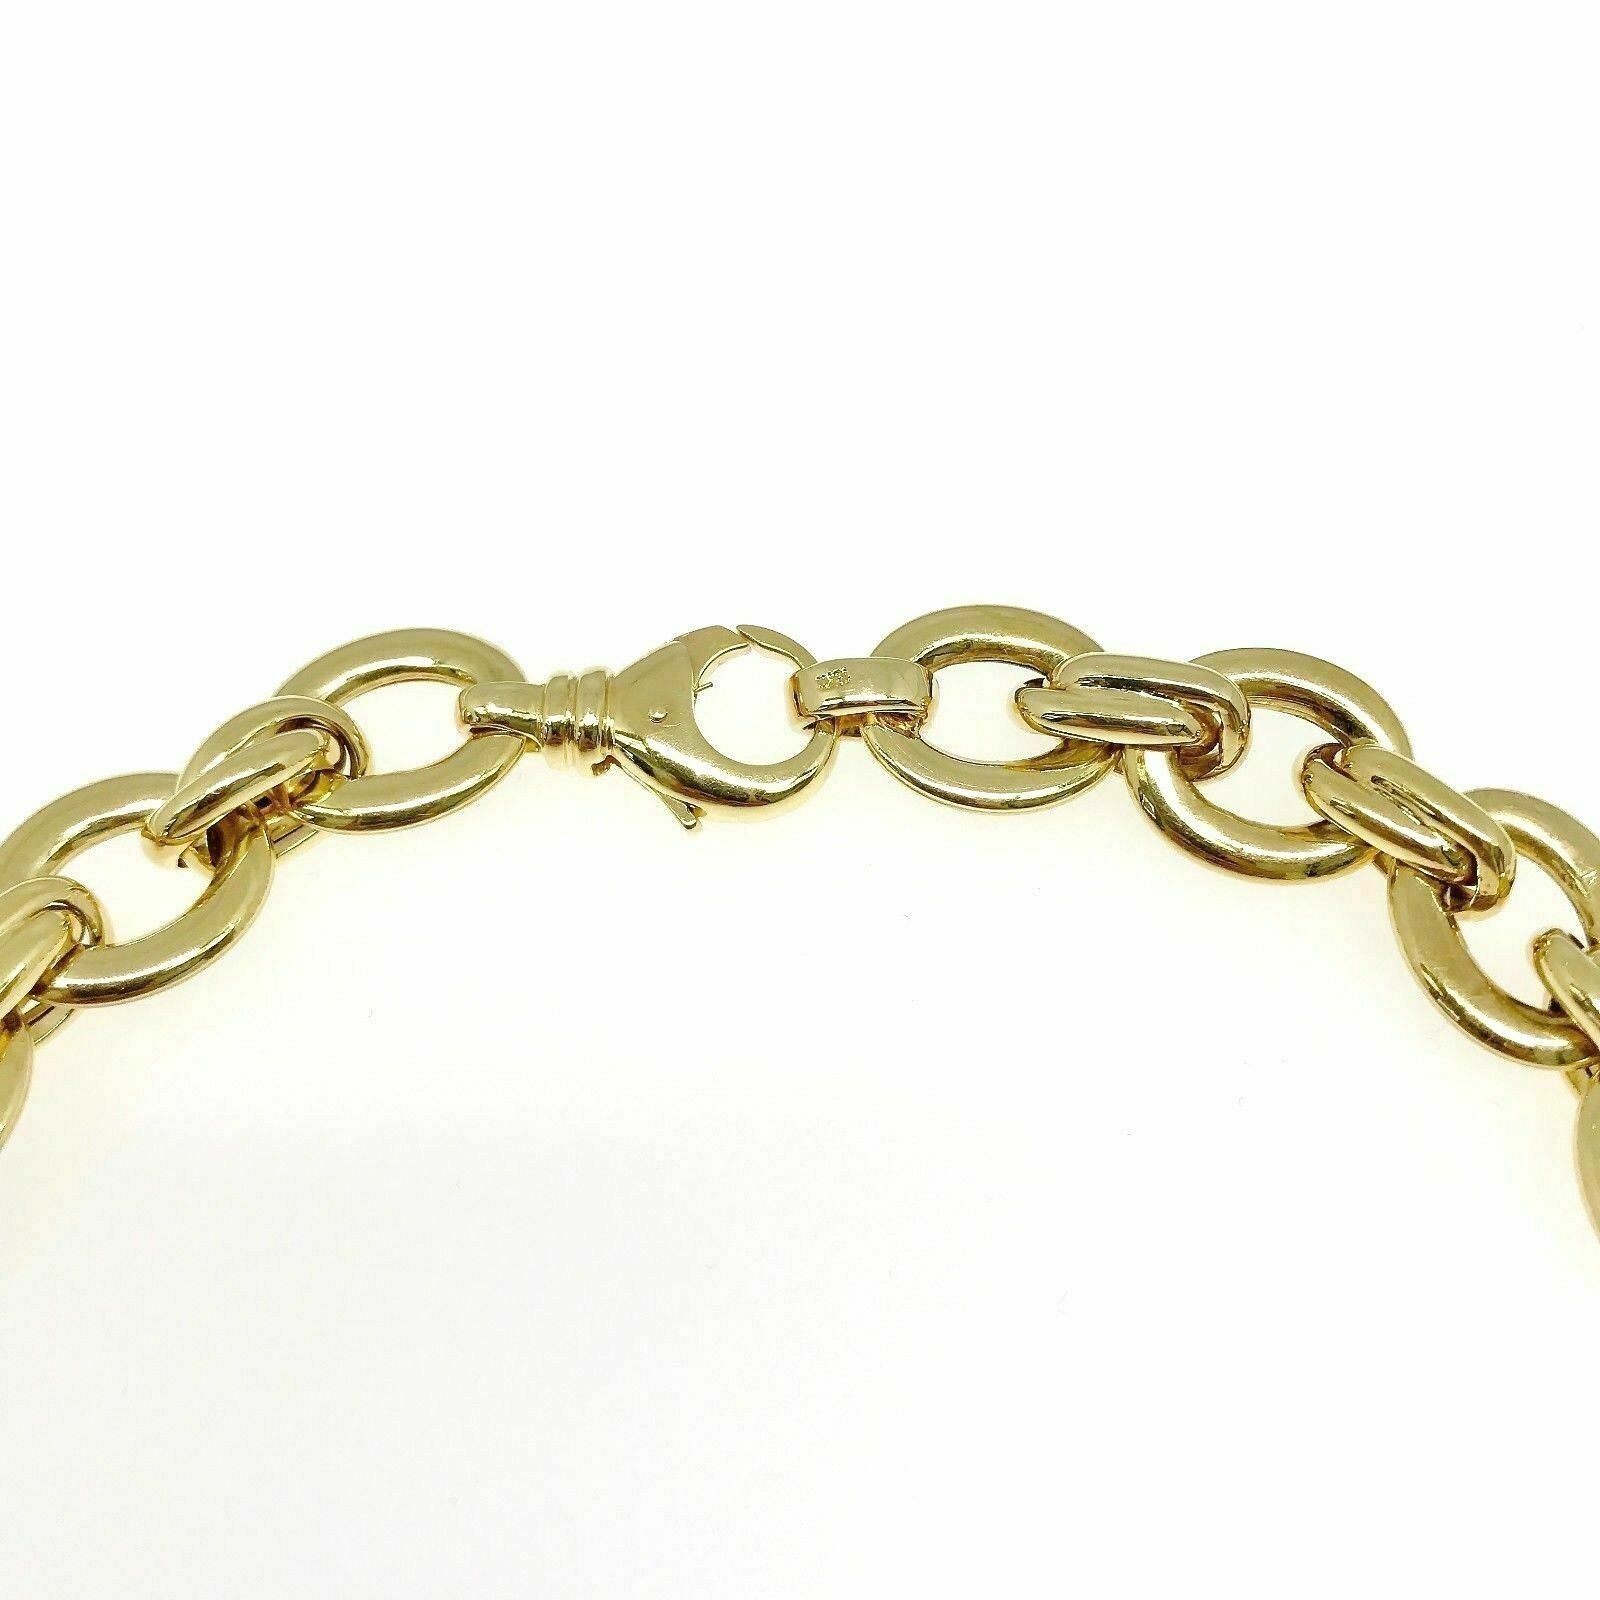 18K YELLOW DESIGNER GOLD OVAL & ROUND LINK NECKLACE